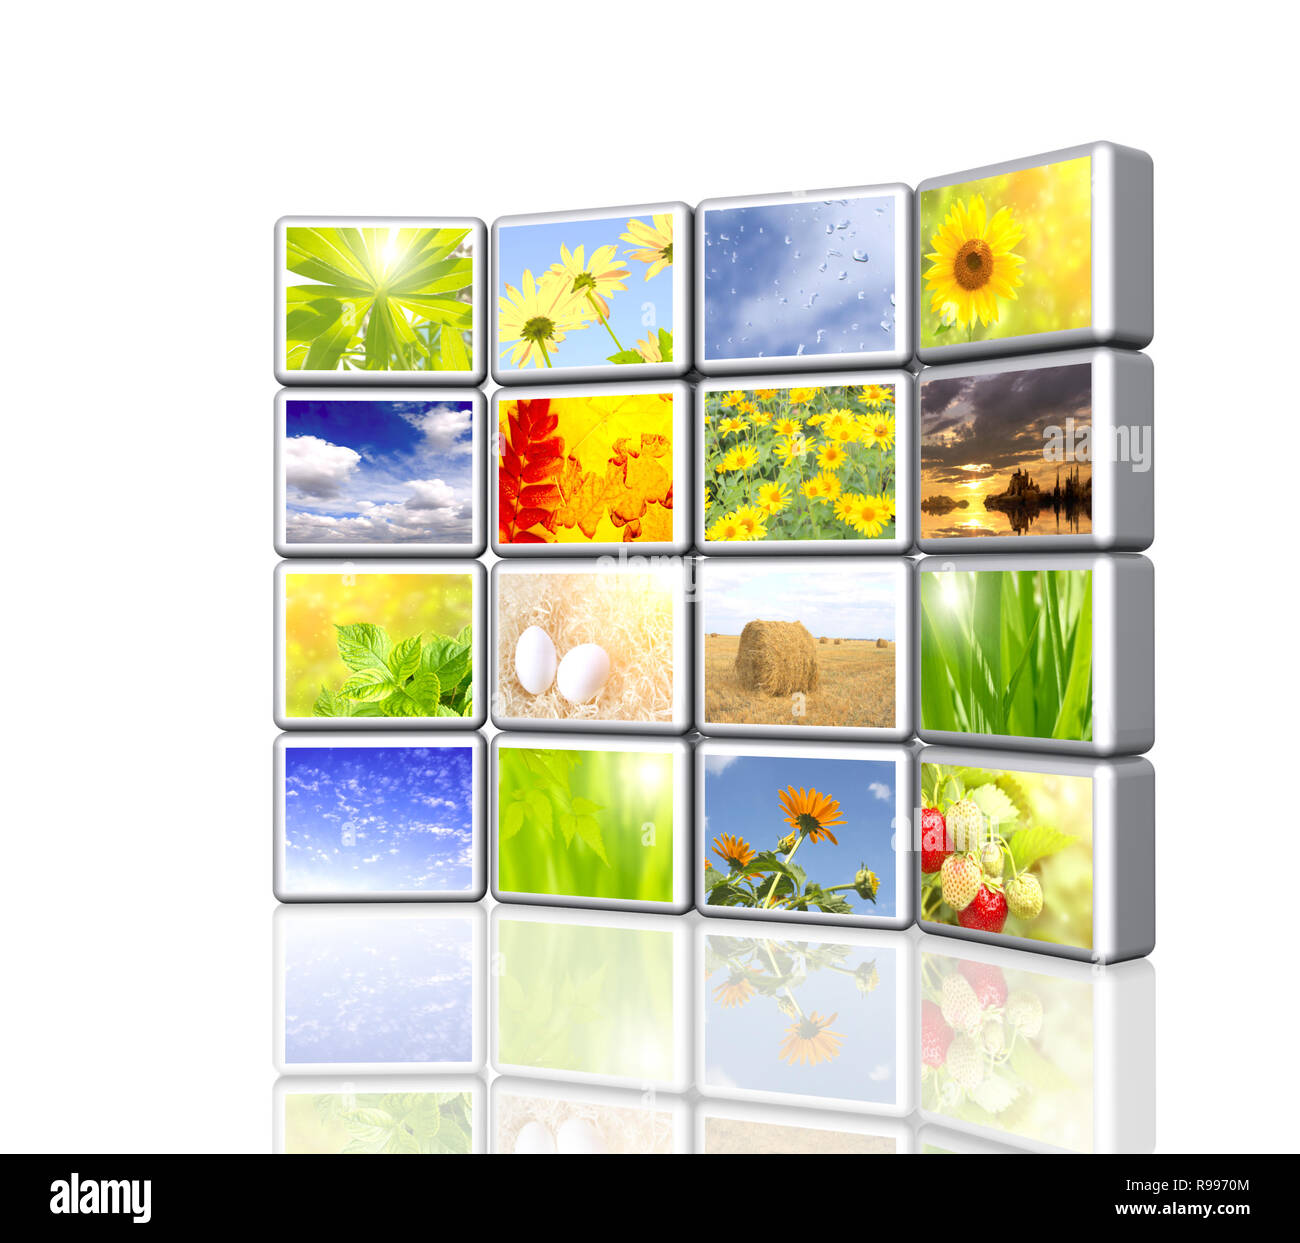 3d screen with photos. Over white Stock Photo